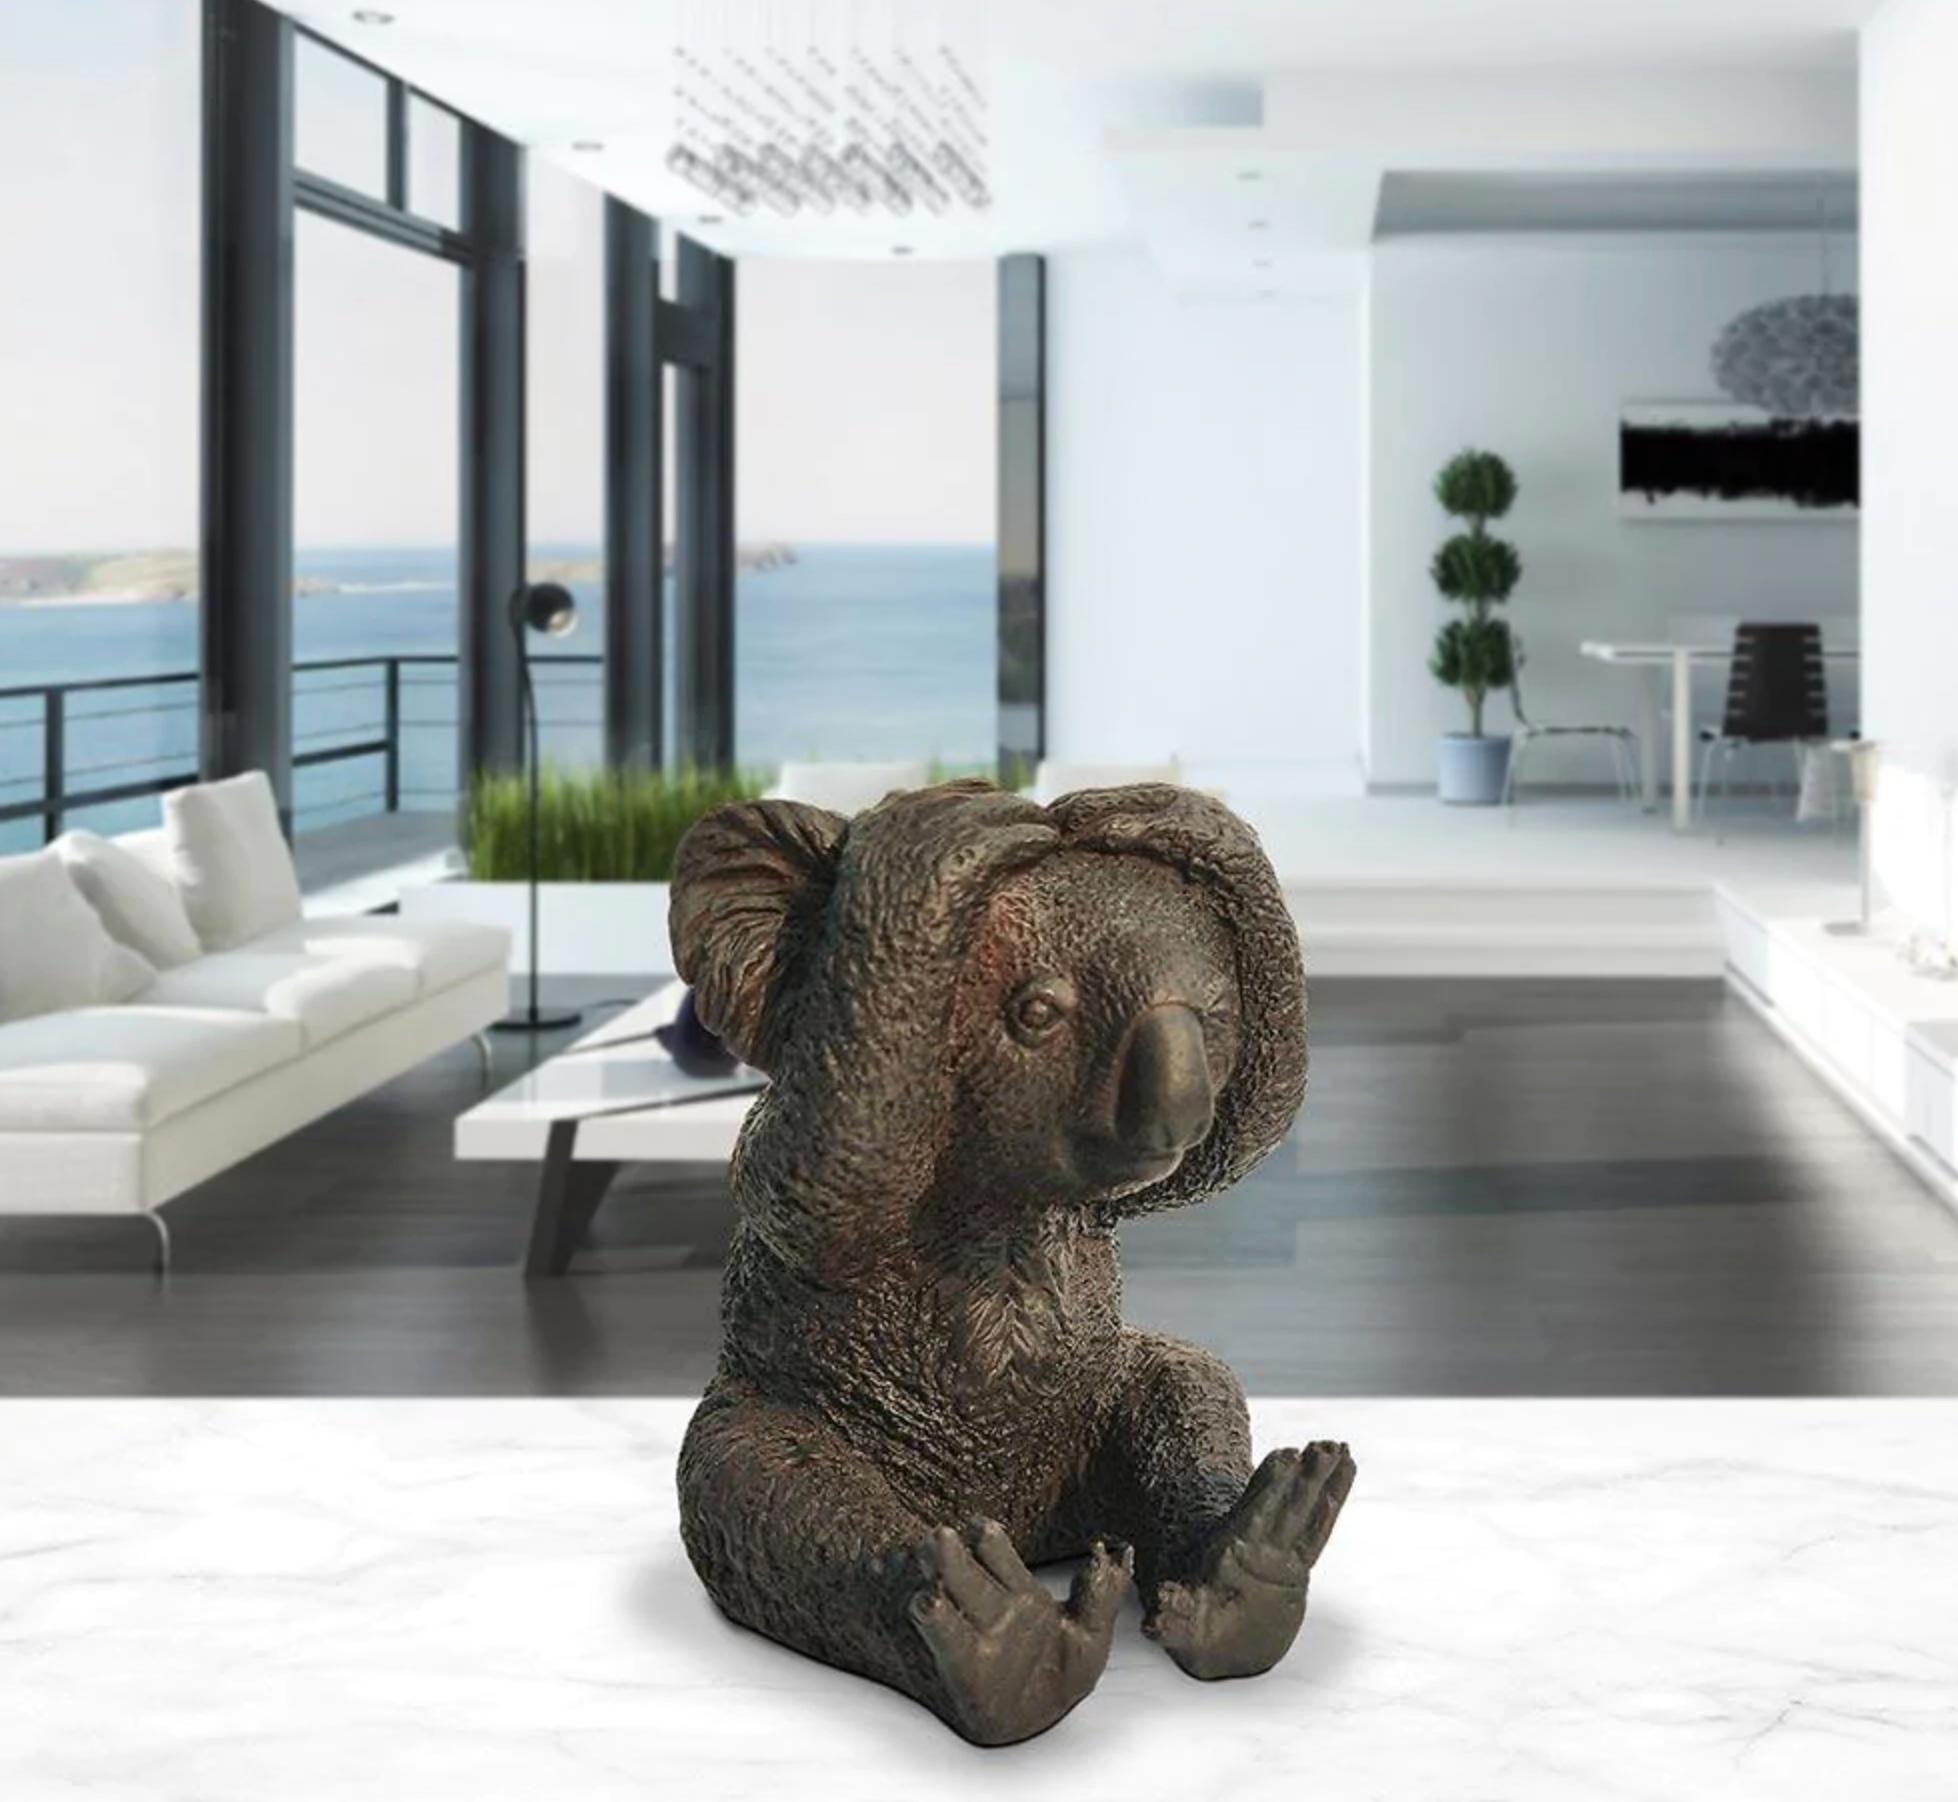 Title: Kevin The koala feels shy
Authentic bronze sculpture

This authentic bronze sculpture titled 'Kevin The koala feels shy' by artists Gillie and Marc has been meticulously crafted in bronze. It features a koala sitting and comes in a